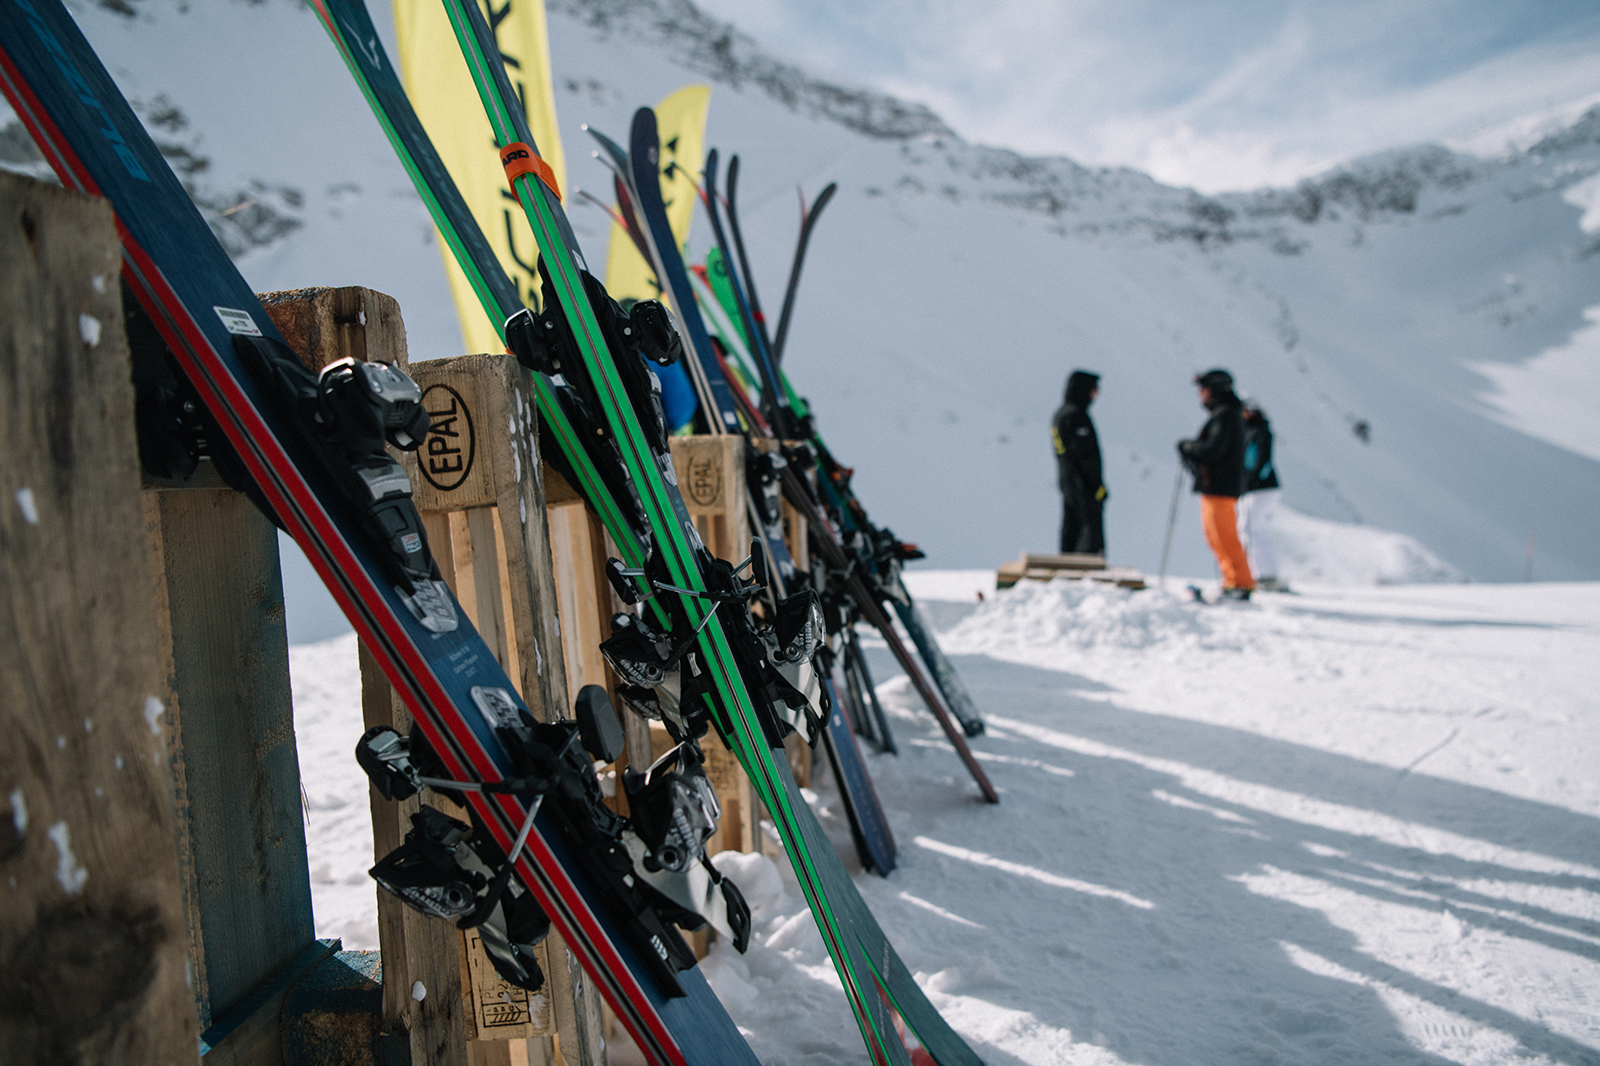 Several pairs of skis leaning against a wooden frame.